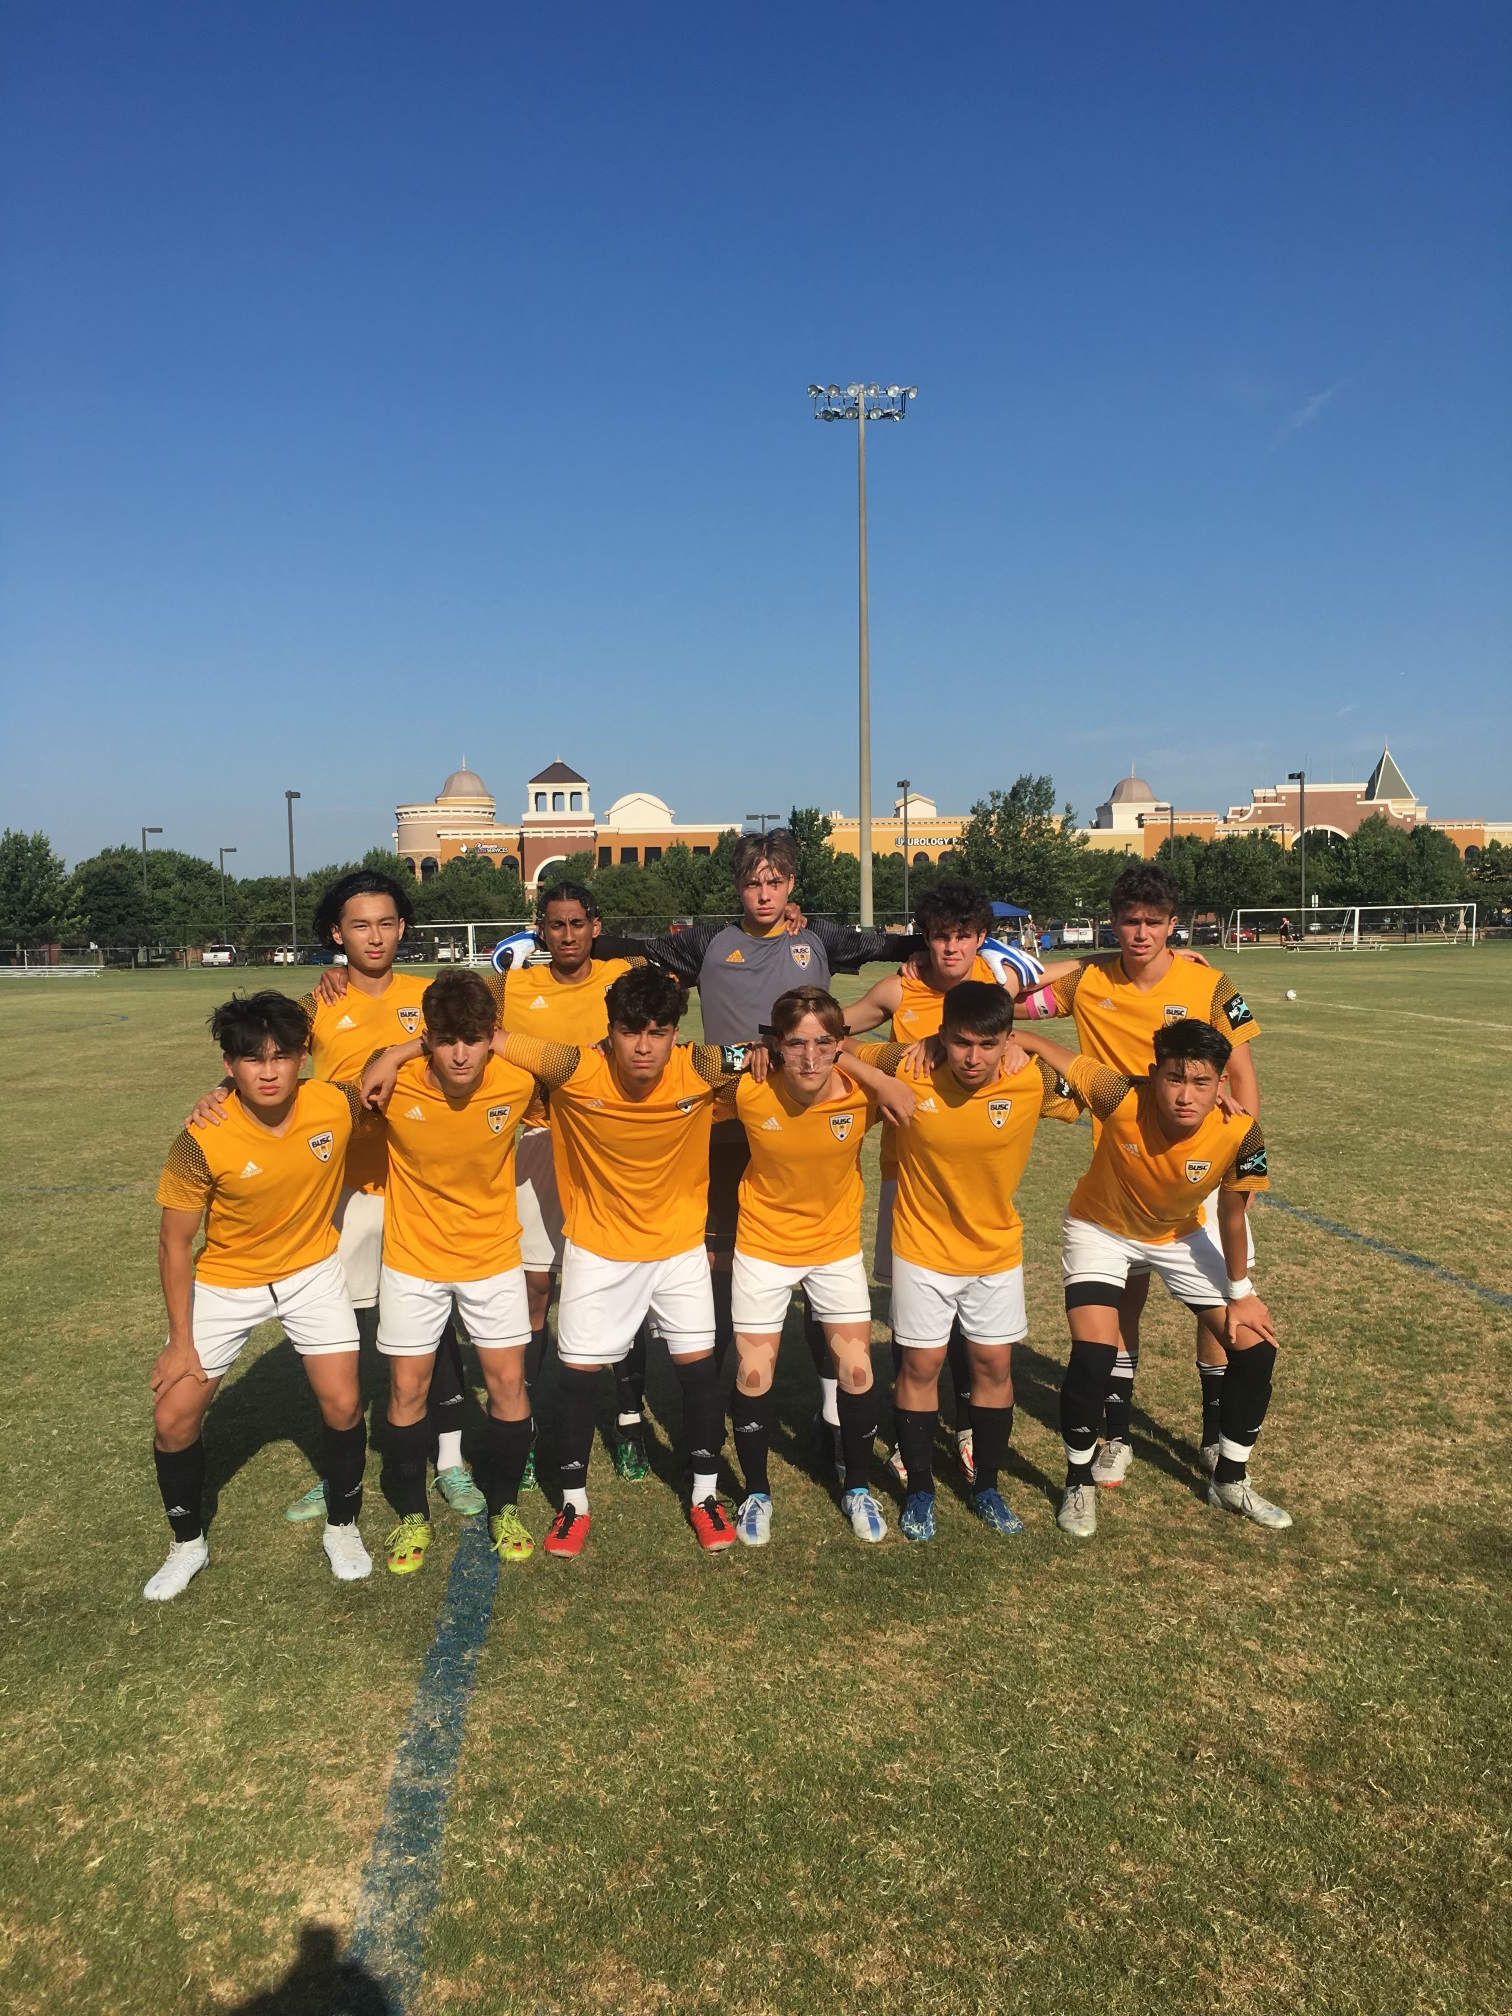 U-17 MLS NEXT team ends Cup with 3-3 tie with NYSC!